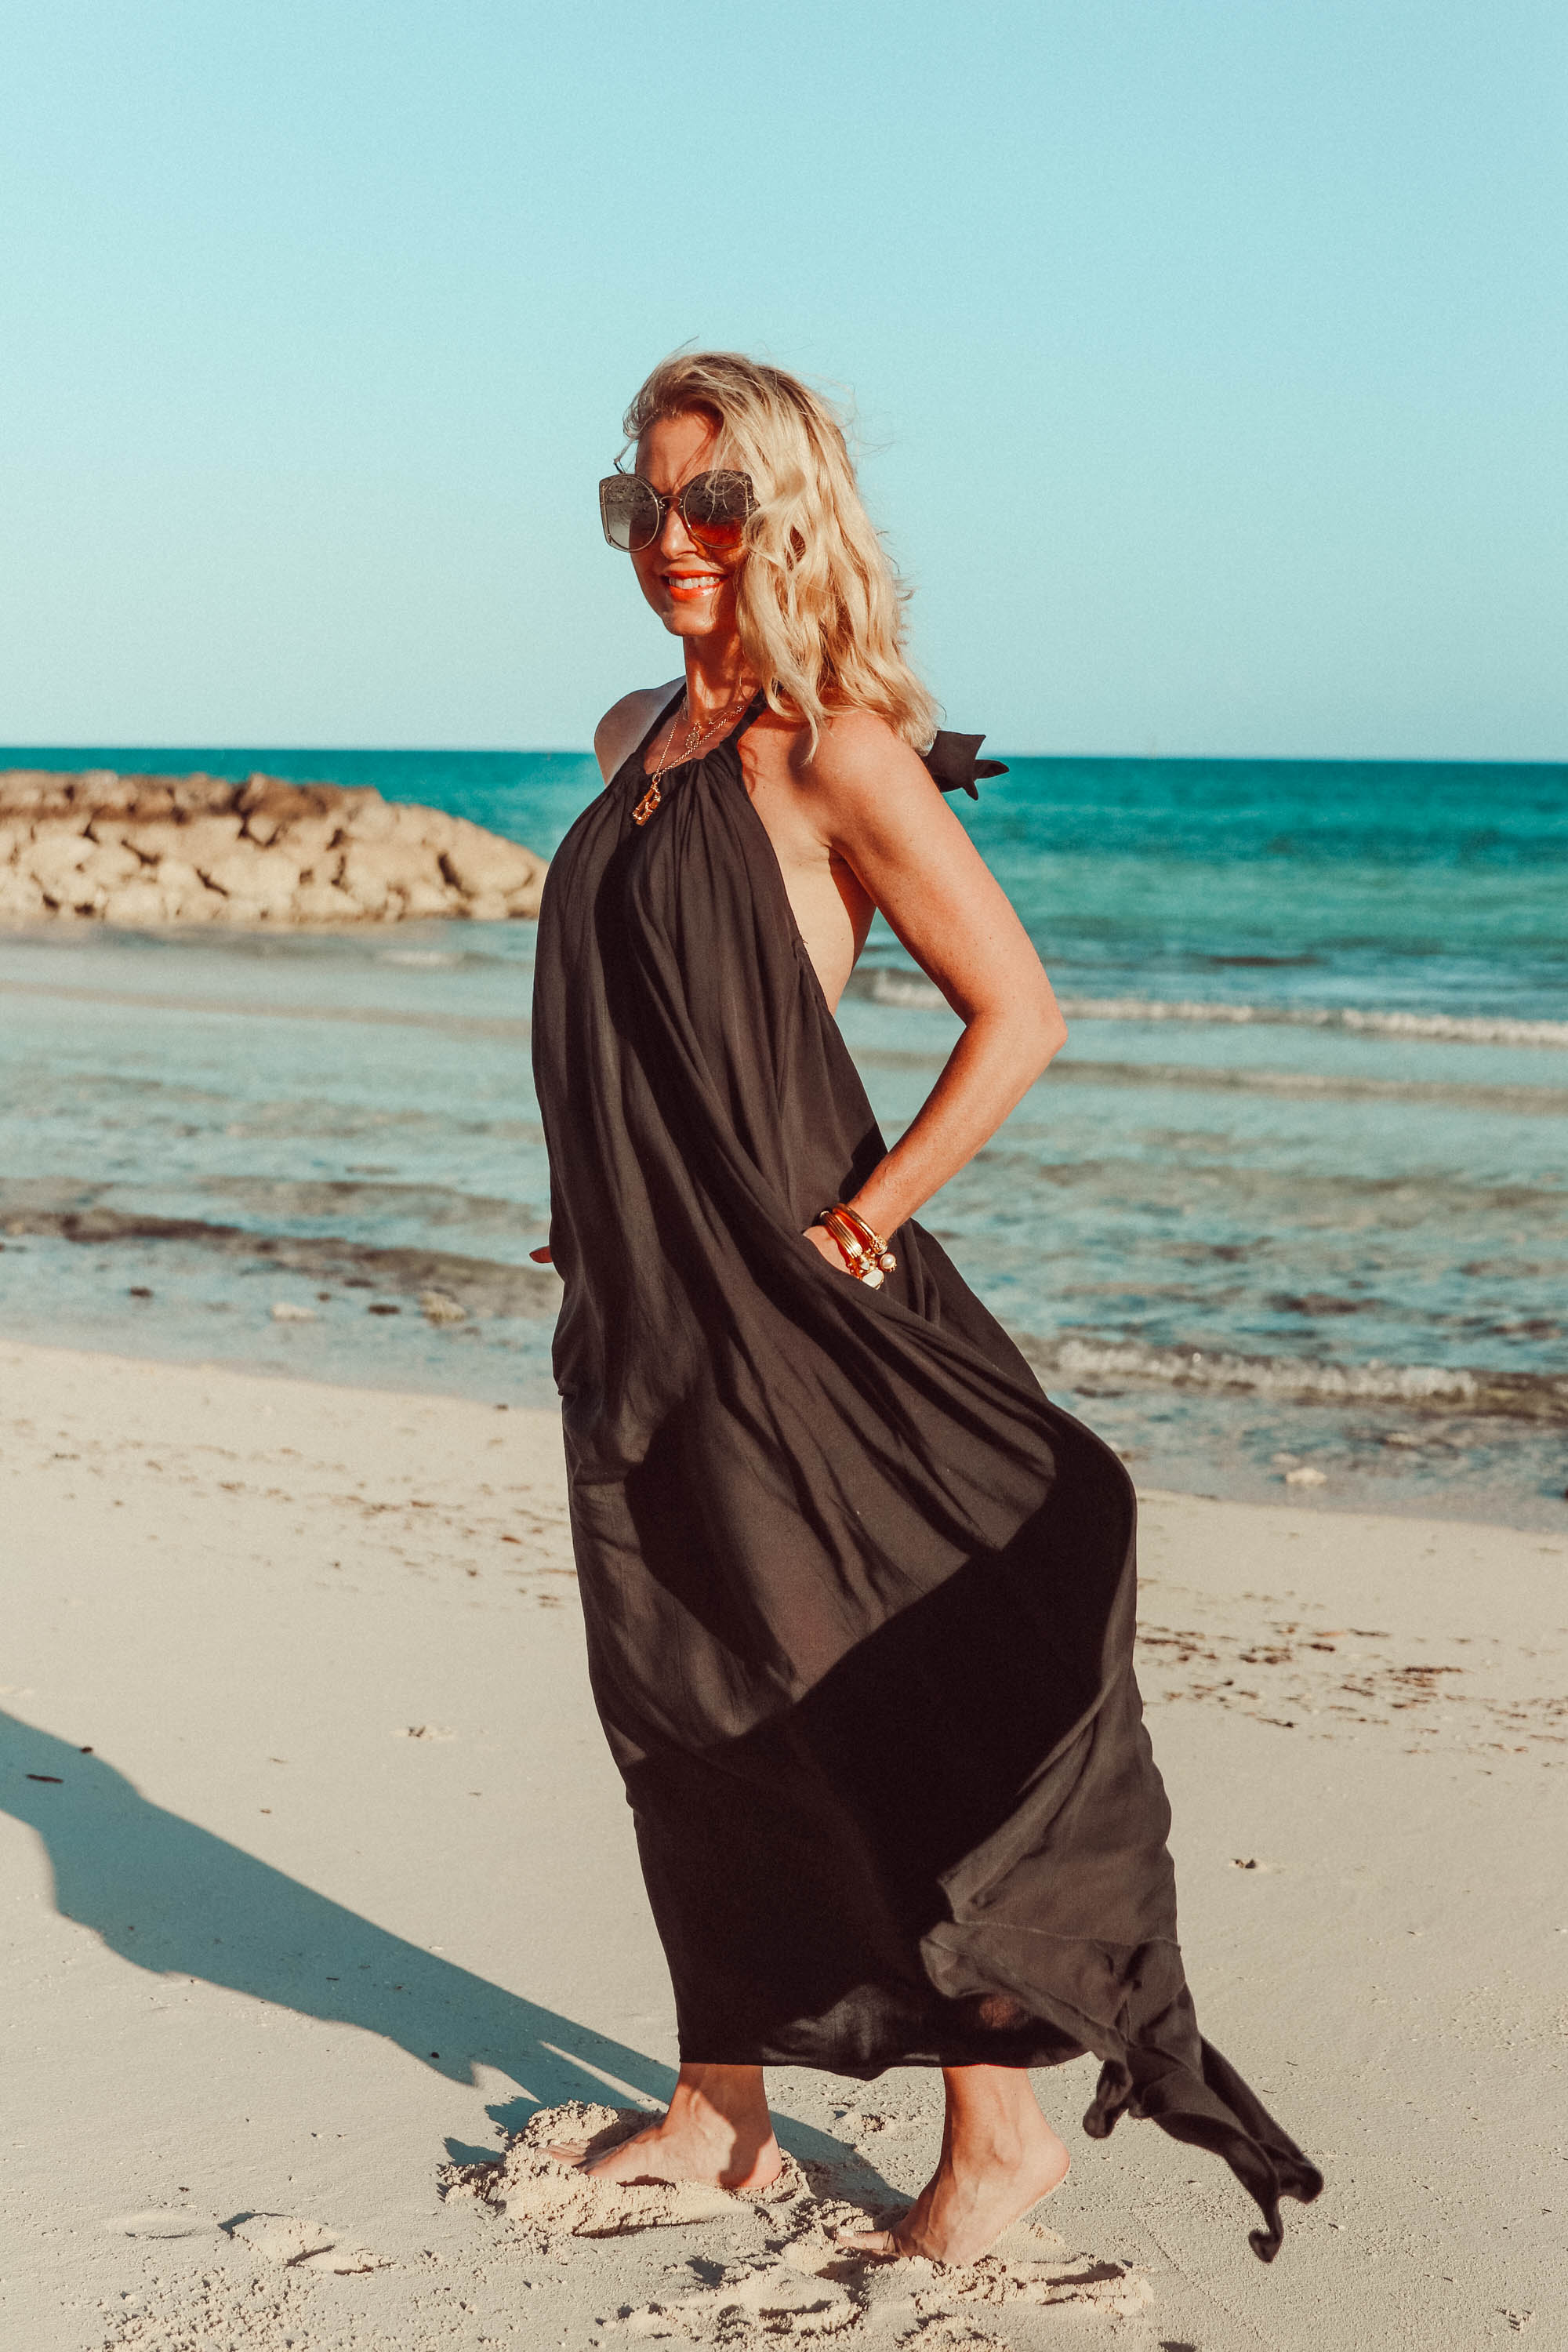 Best Coverups, Fashion blogger Erin Busbee of BusbeeStyle.com wearing a black halter neck coverup by Elan on the beach in the Bahamas